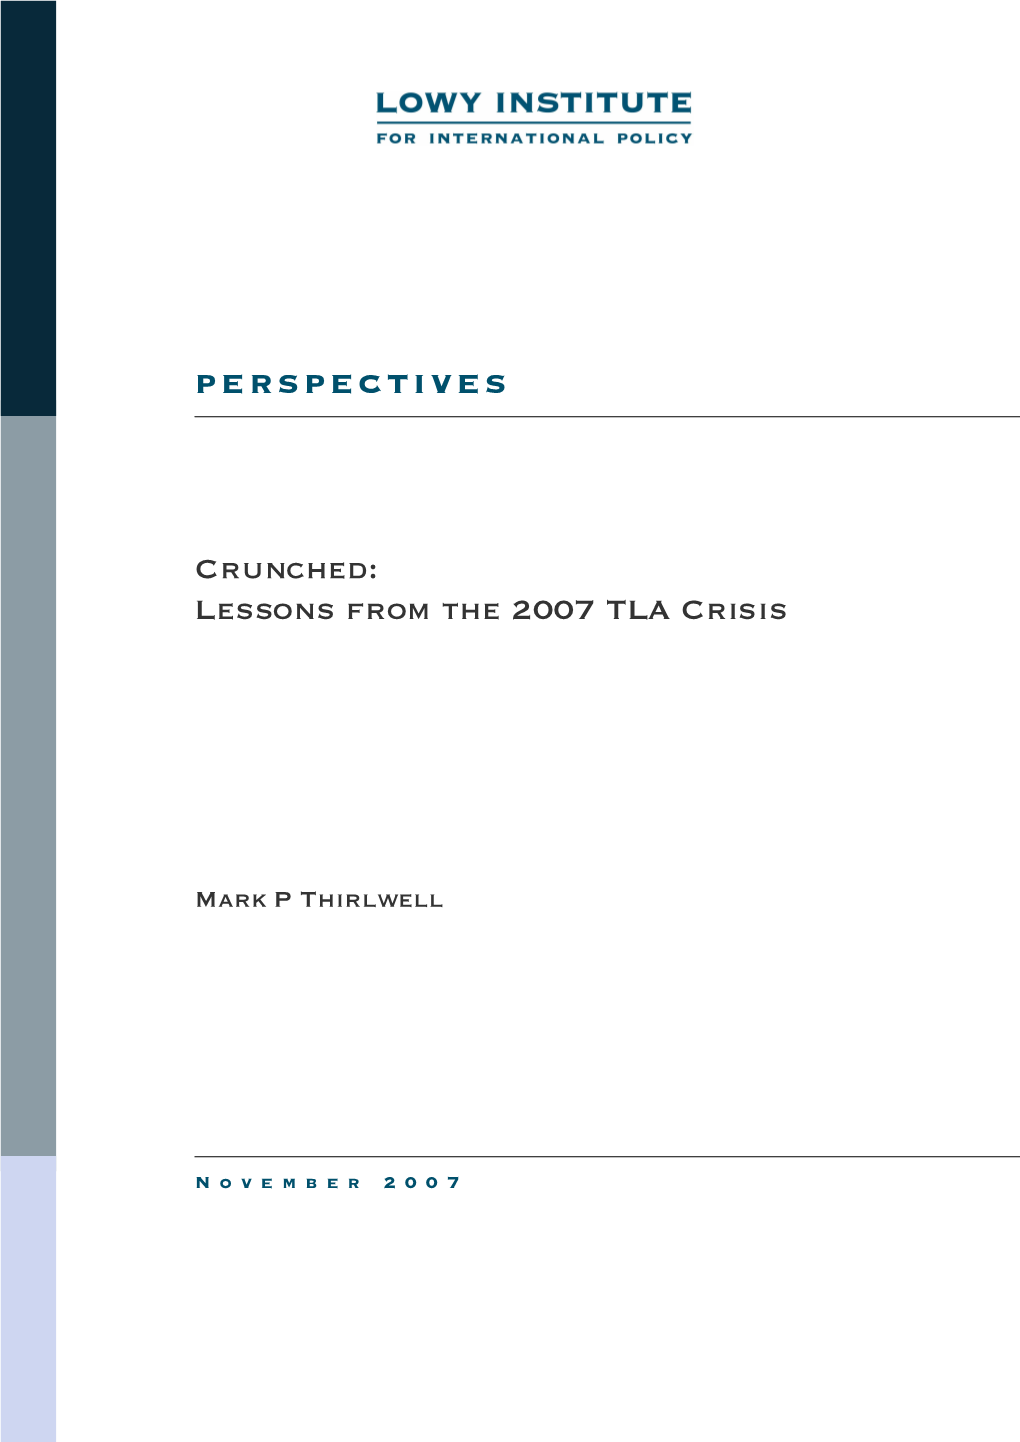 Crunched, Lessons from the 2007 TLA Crisis